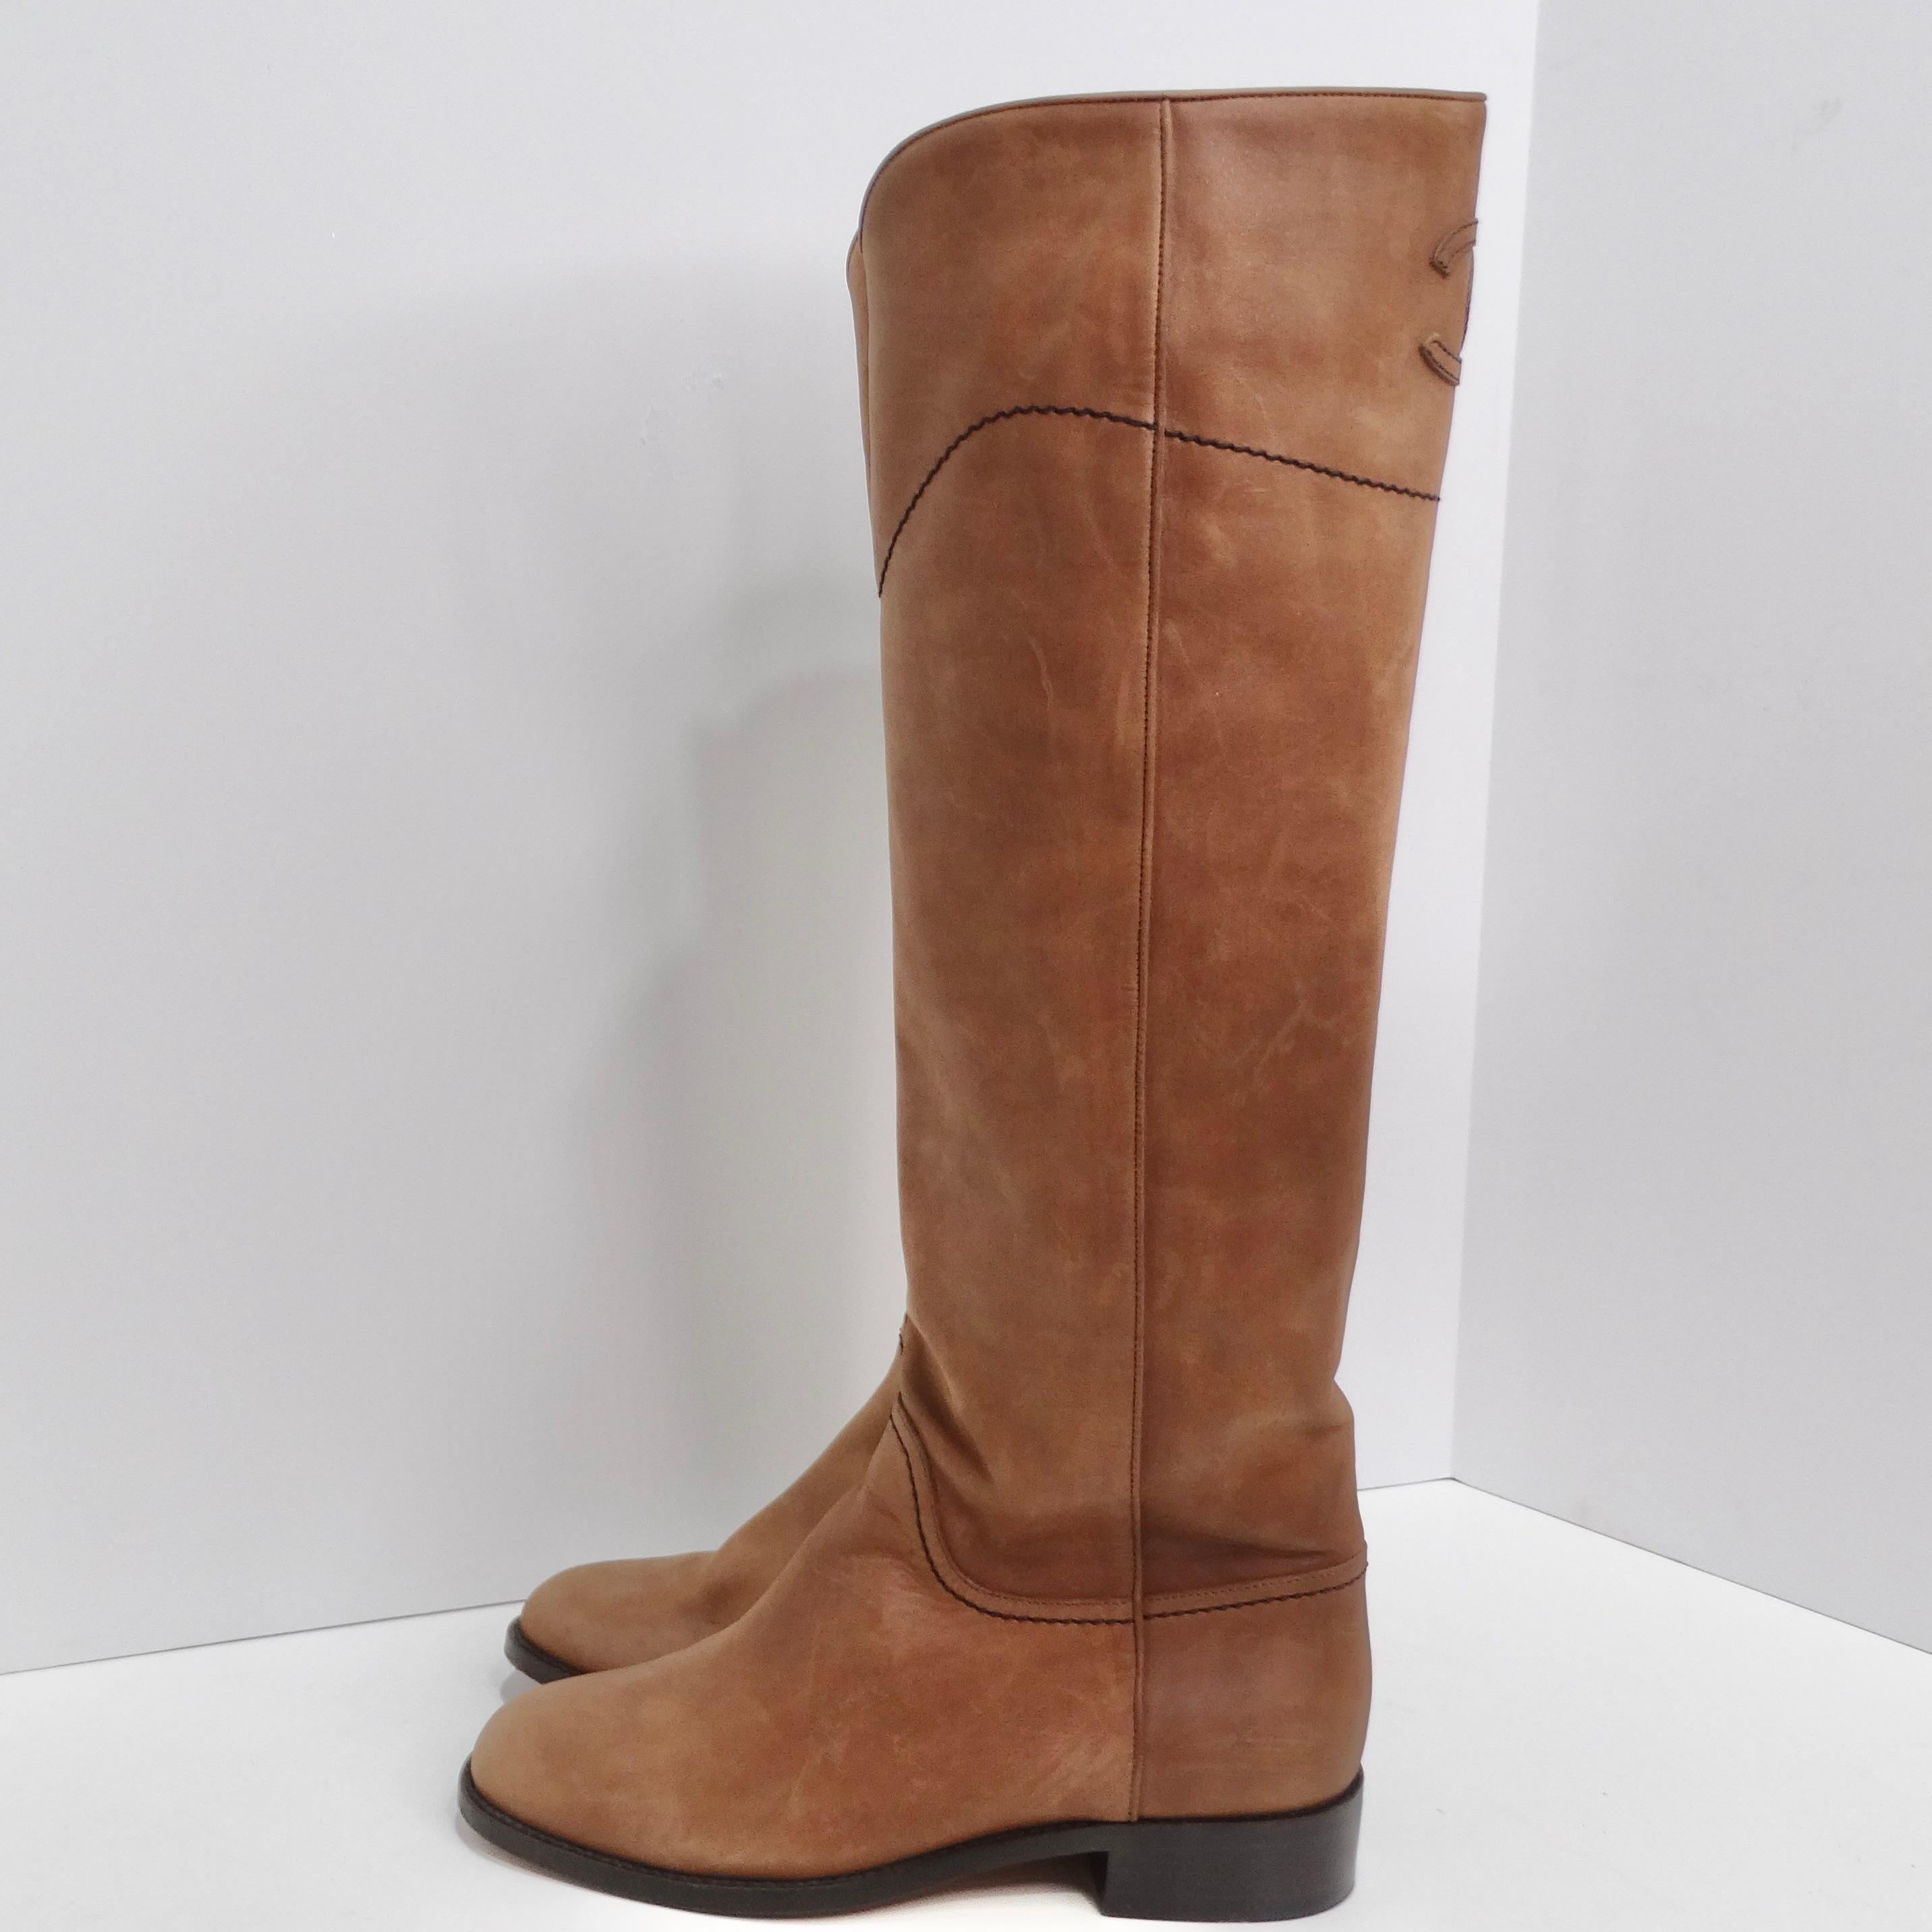 Chanel 2015 Interlocking CC Logo Riding Boots In Good Condition For Sale In Scottsdale, AZ